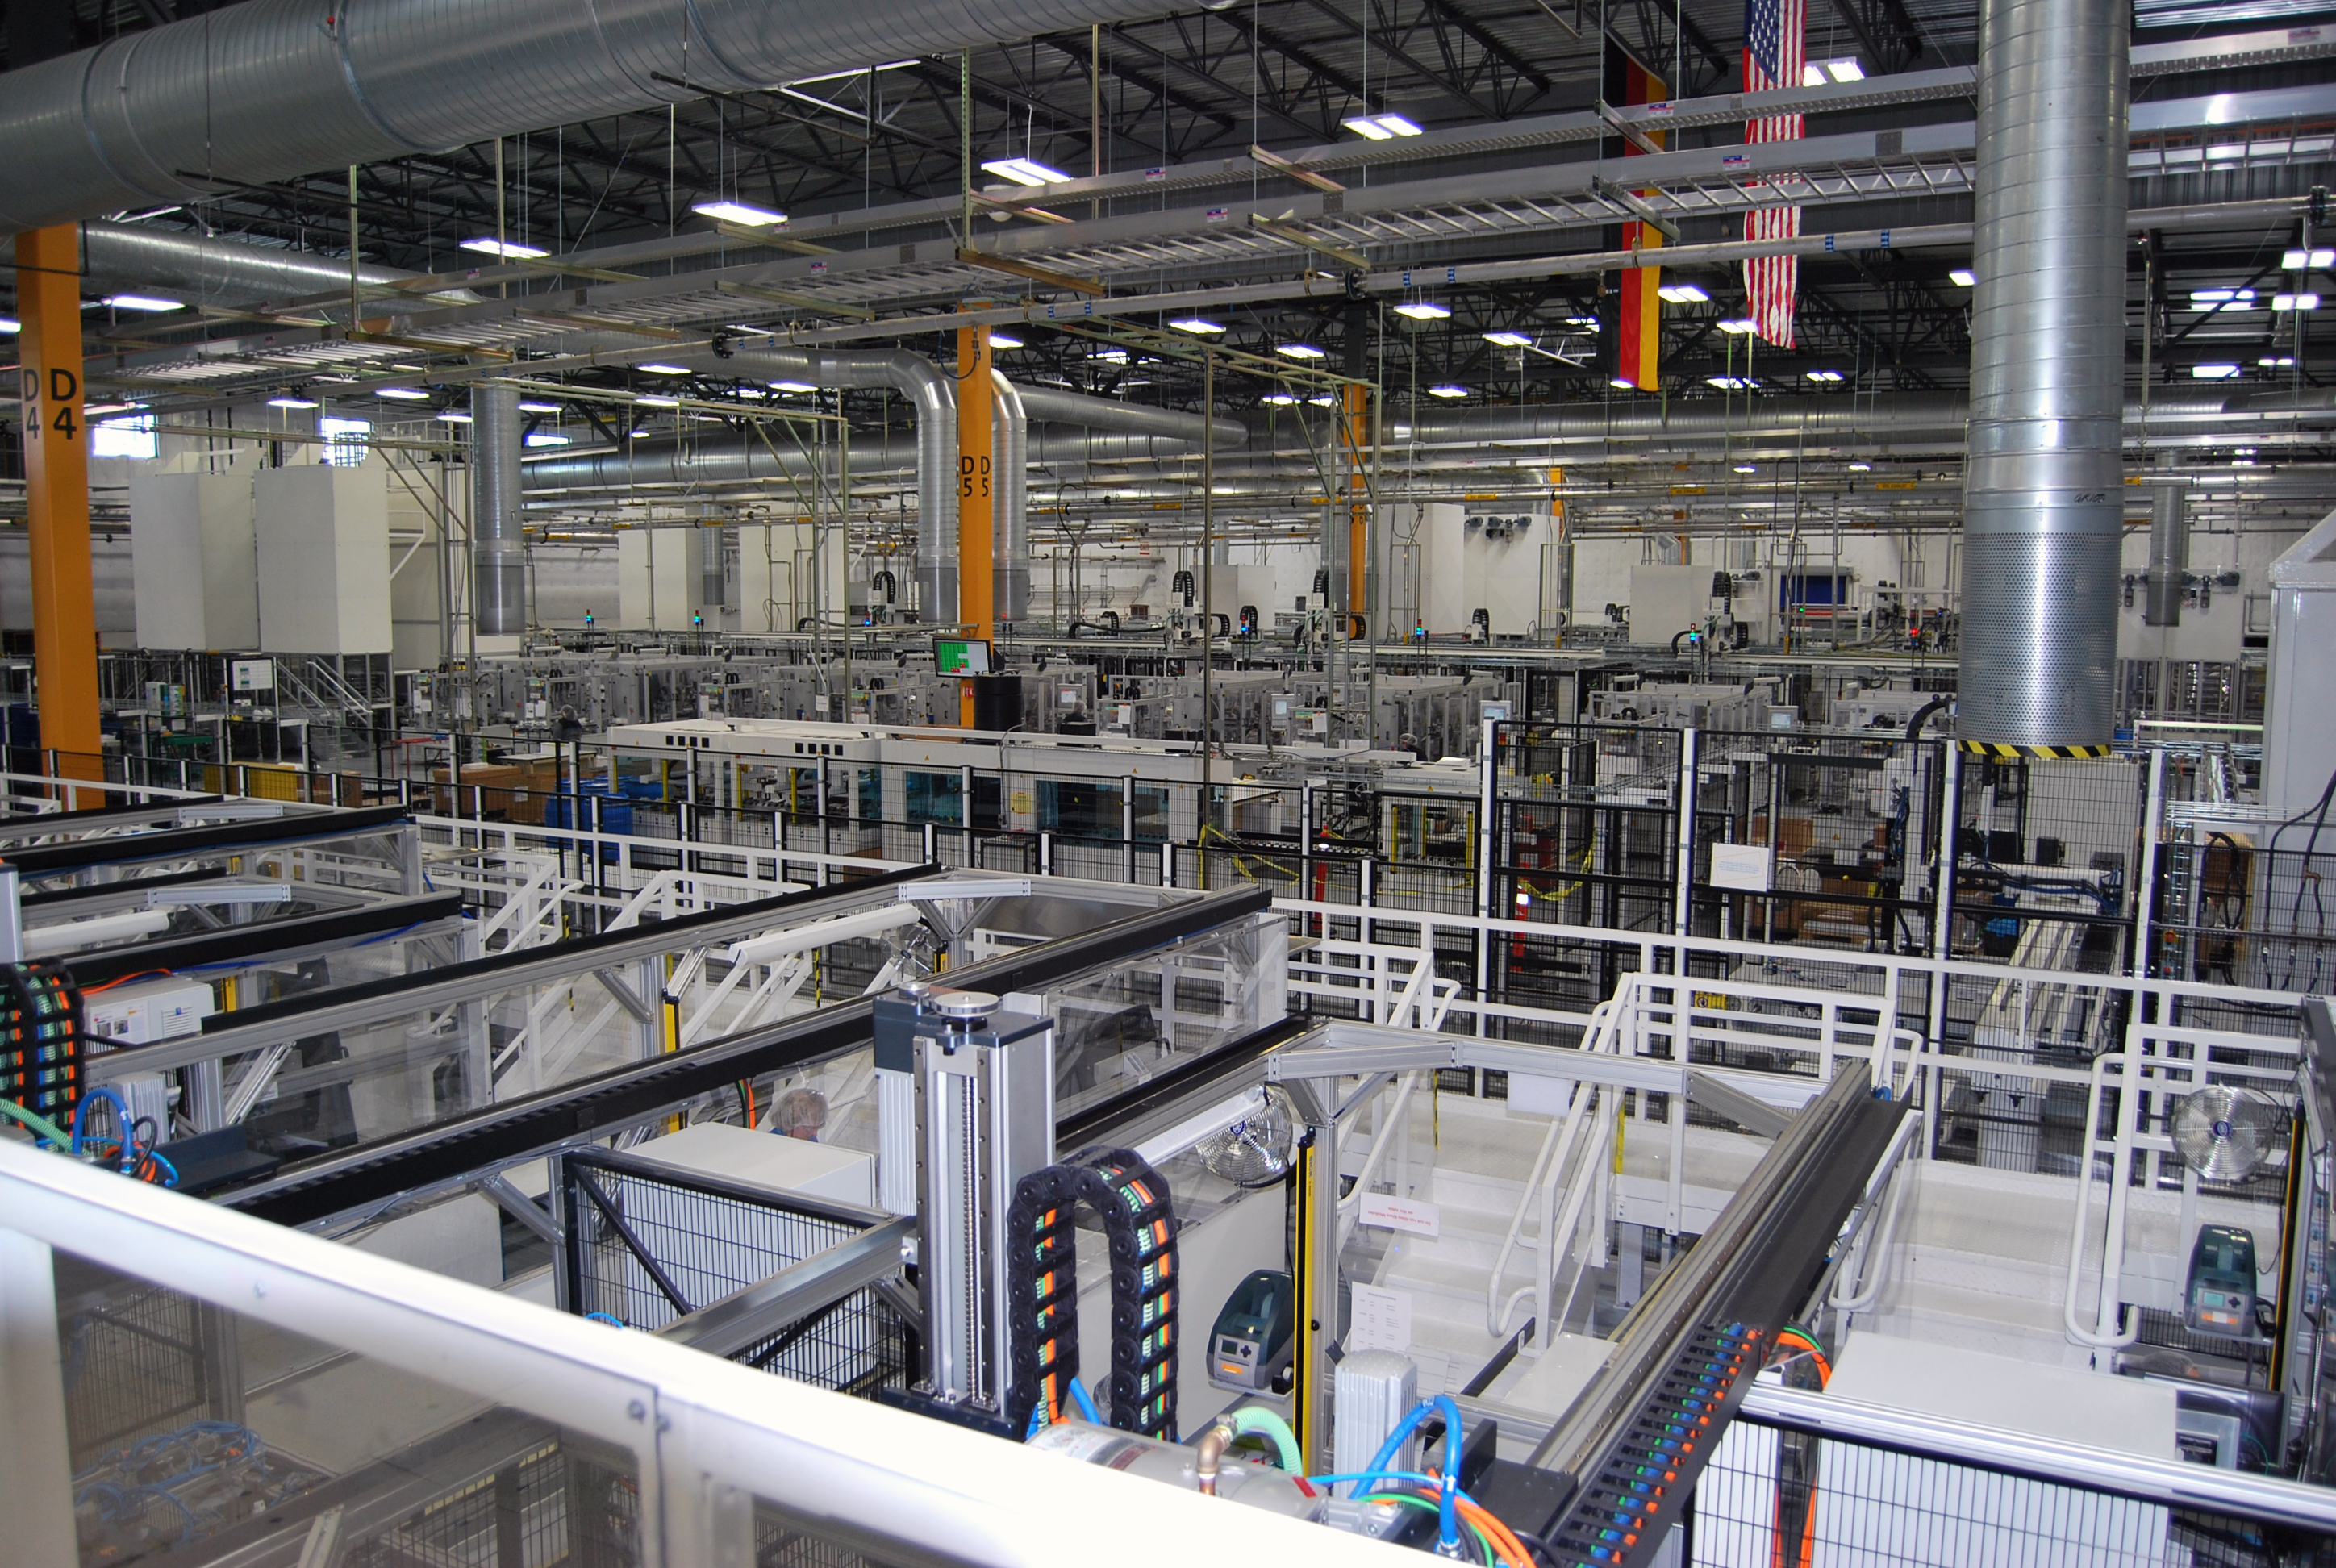 A view of SolarWorld’s panel production line. Photo by Ed Colford